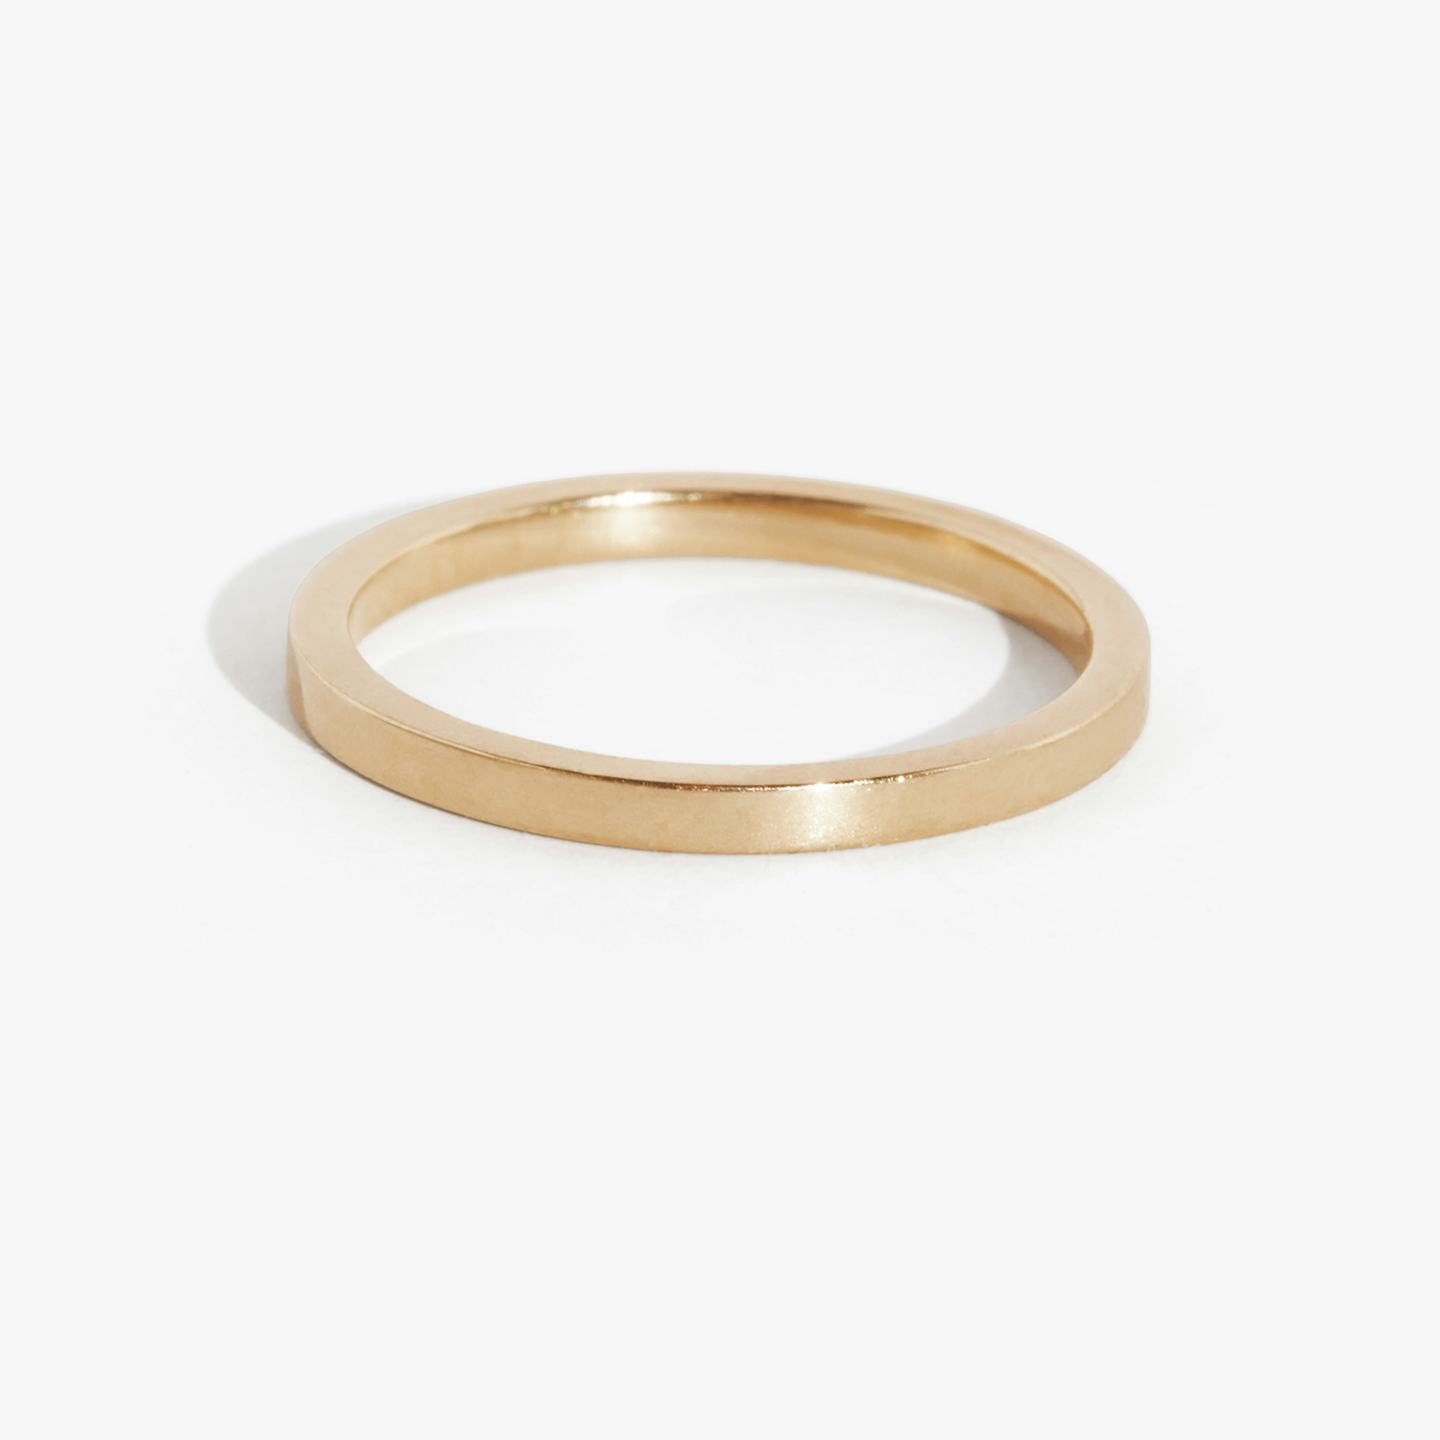 The Flat | 14k | 14k Rose Gold | Band width: Small - 1.5mm